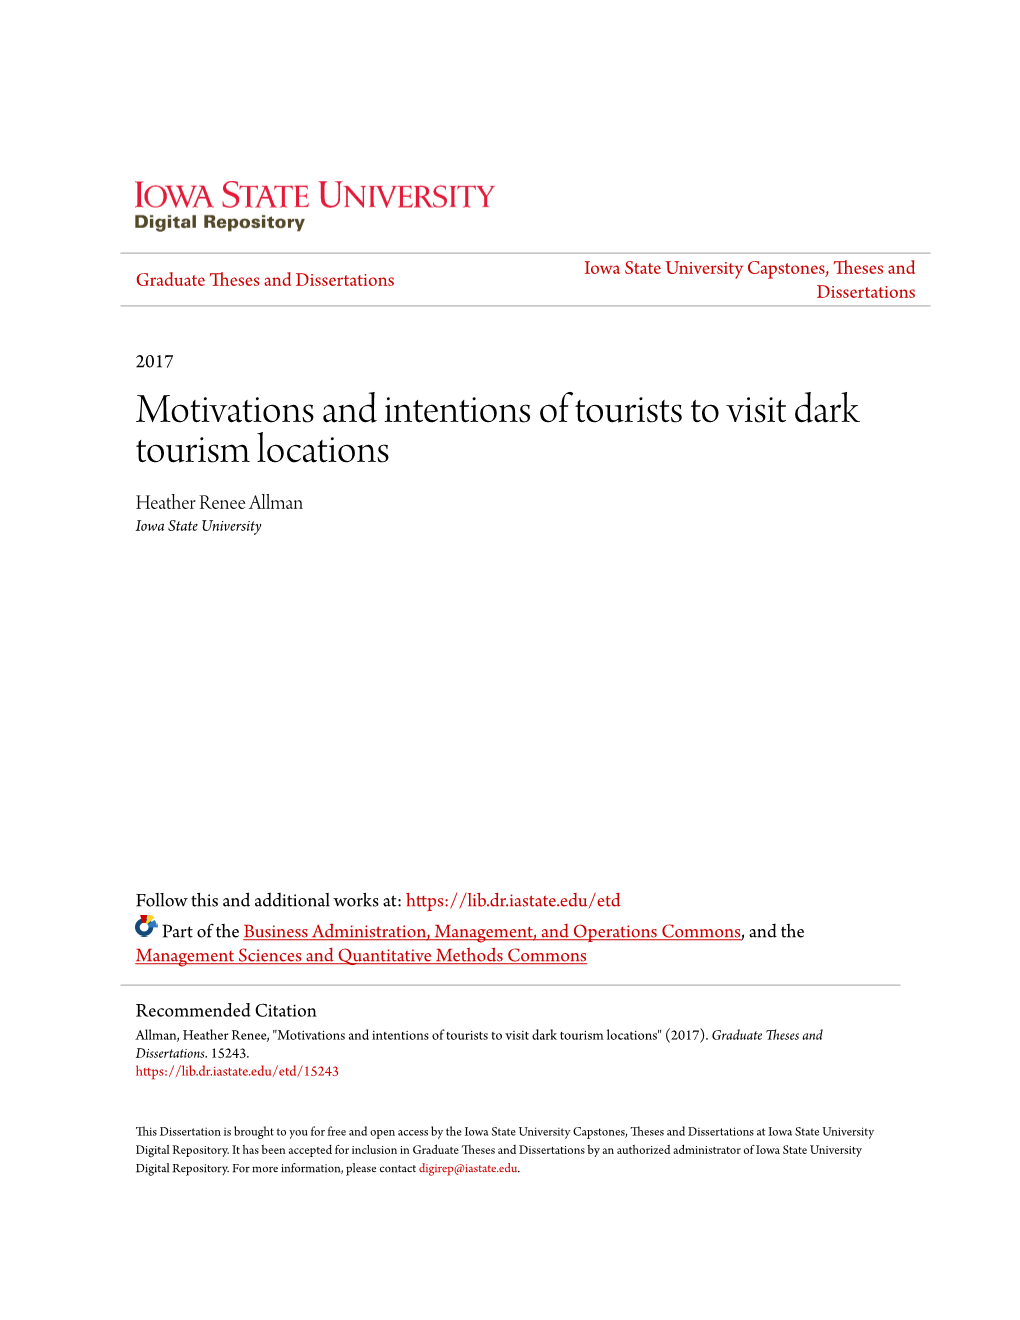 Motivations and Intentions of Tourists to Visit Dark Tourism Locations Heather Renee Allman Iowa State University